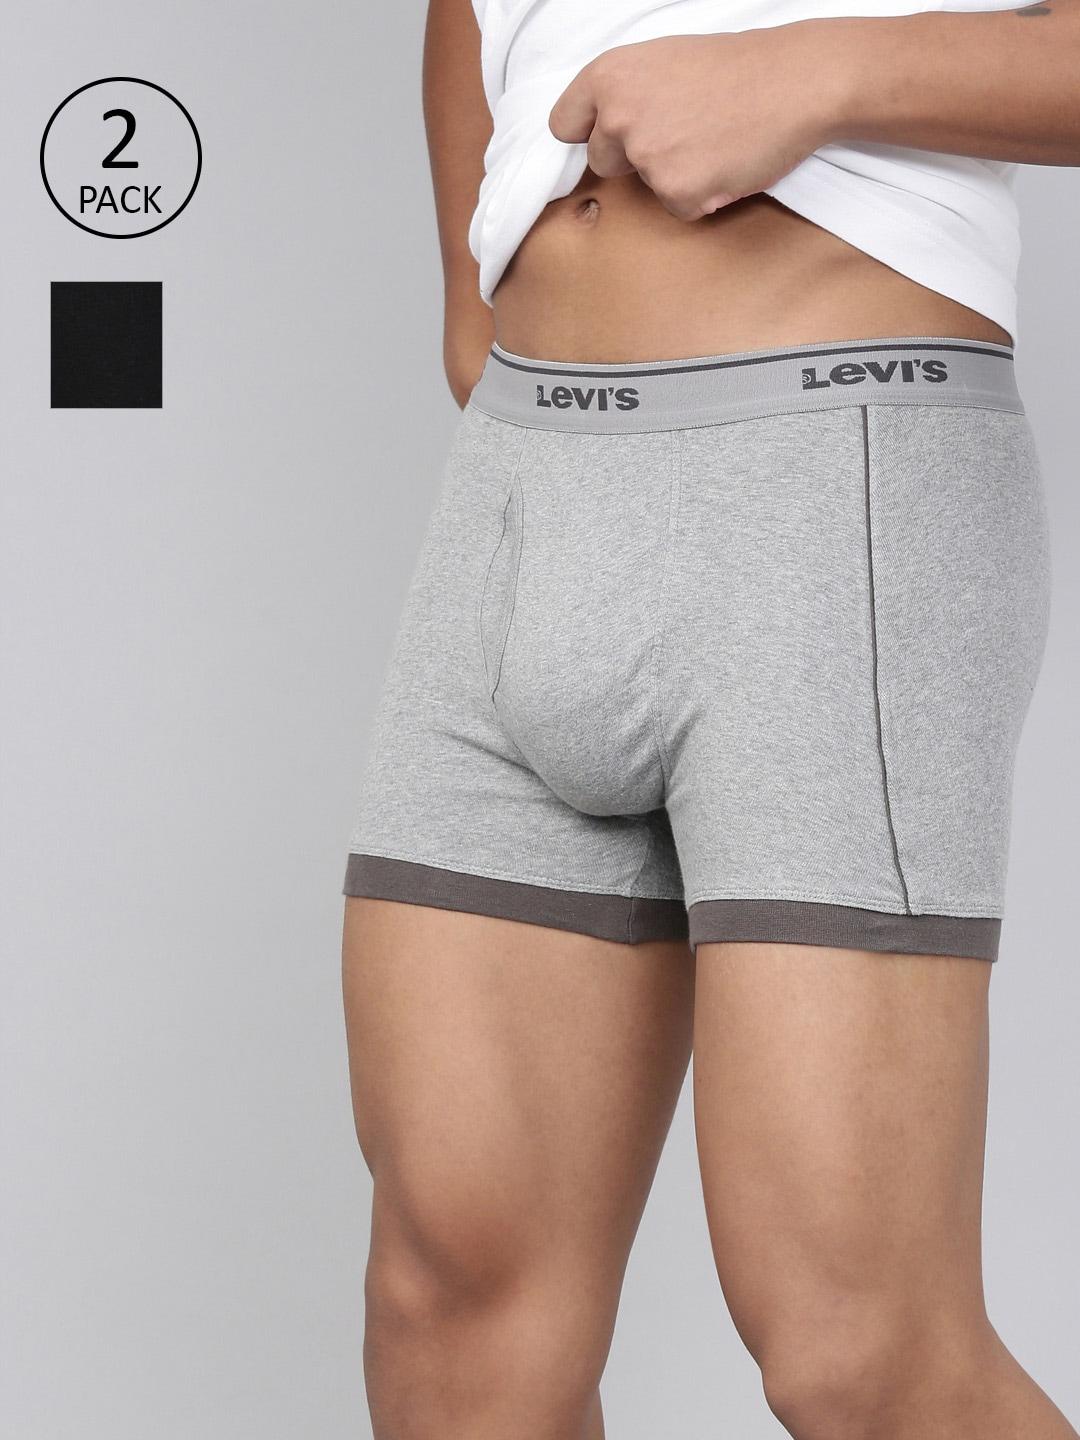 levis-pack-of-2-smartskin-technology-cotton-contra-boxer-brief-with-tag-free-comfort-007